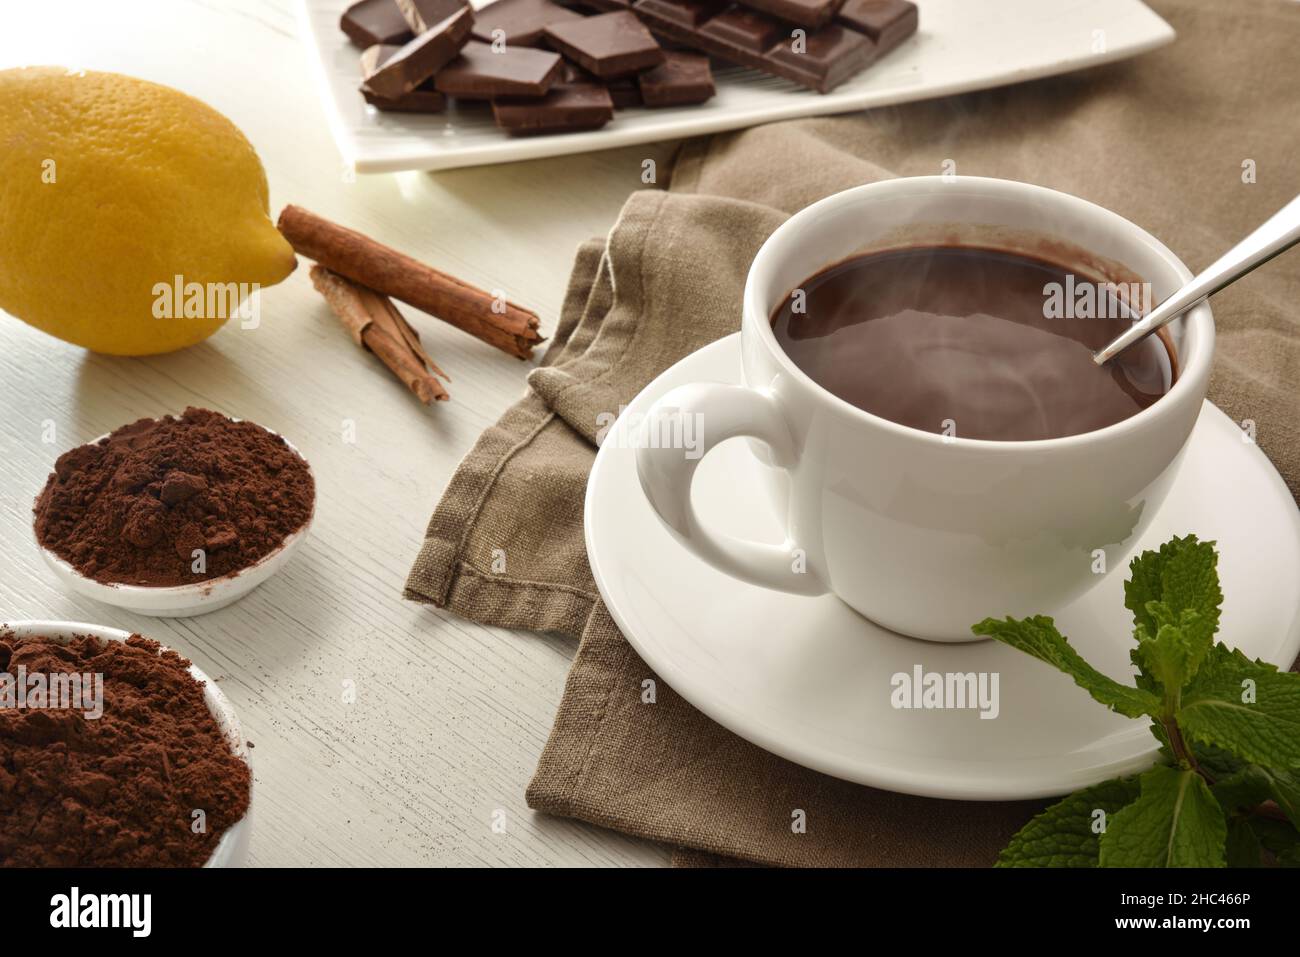 Hot chocolate in white ceramic mug, pieces and chocolate powder in bowl on wooden table. Elevated view. Horizontal composition. Stock Photo